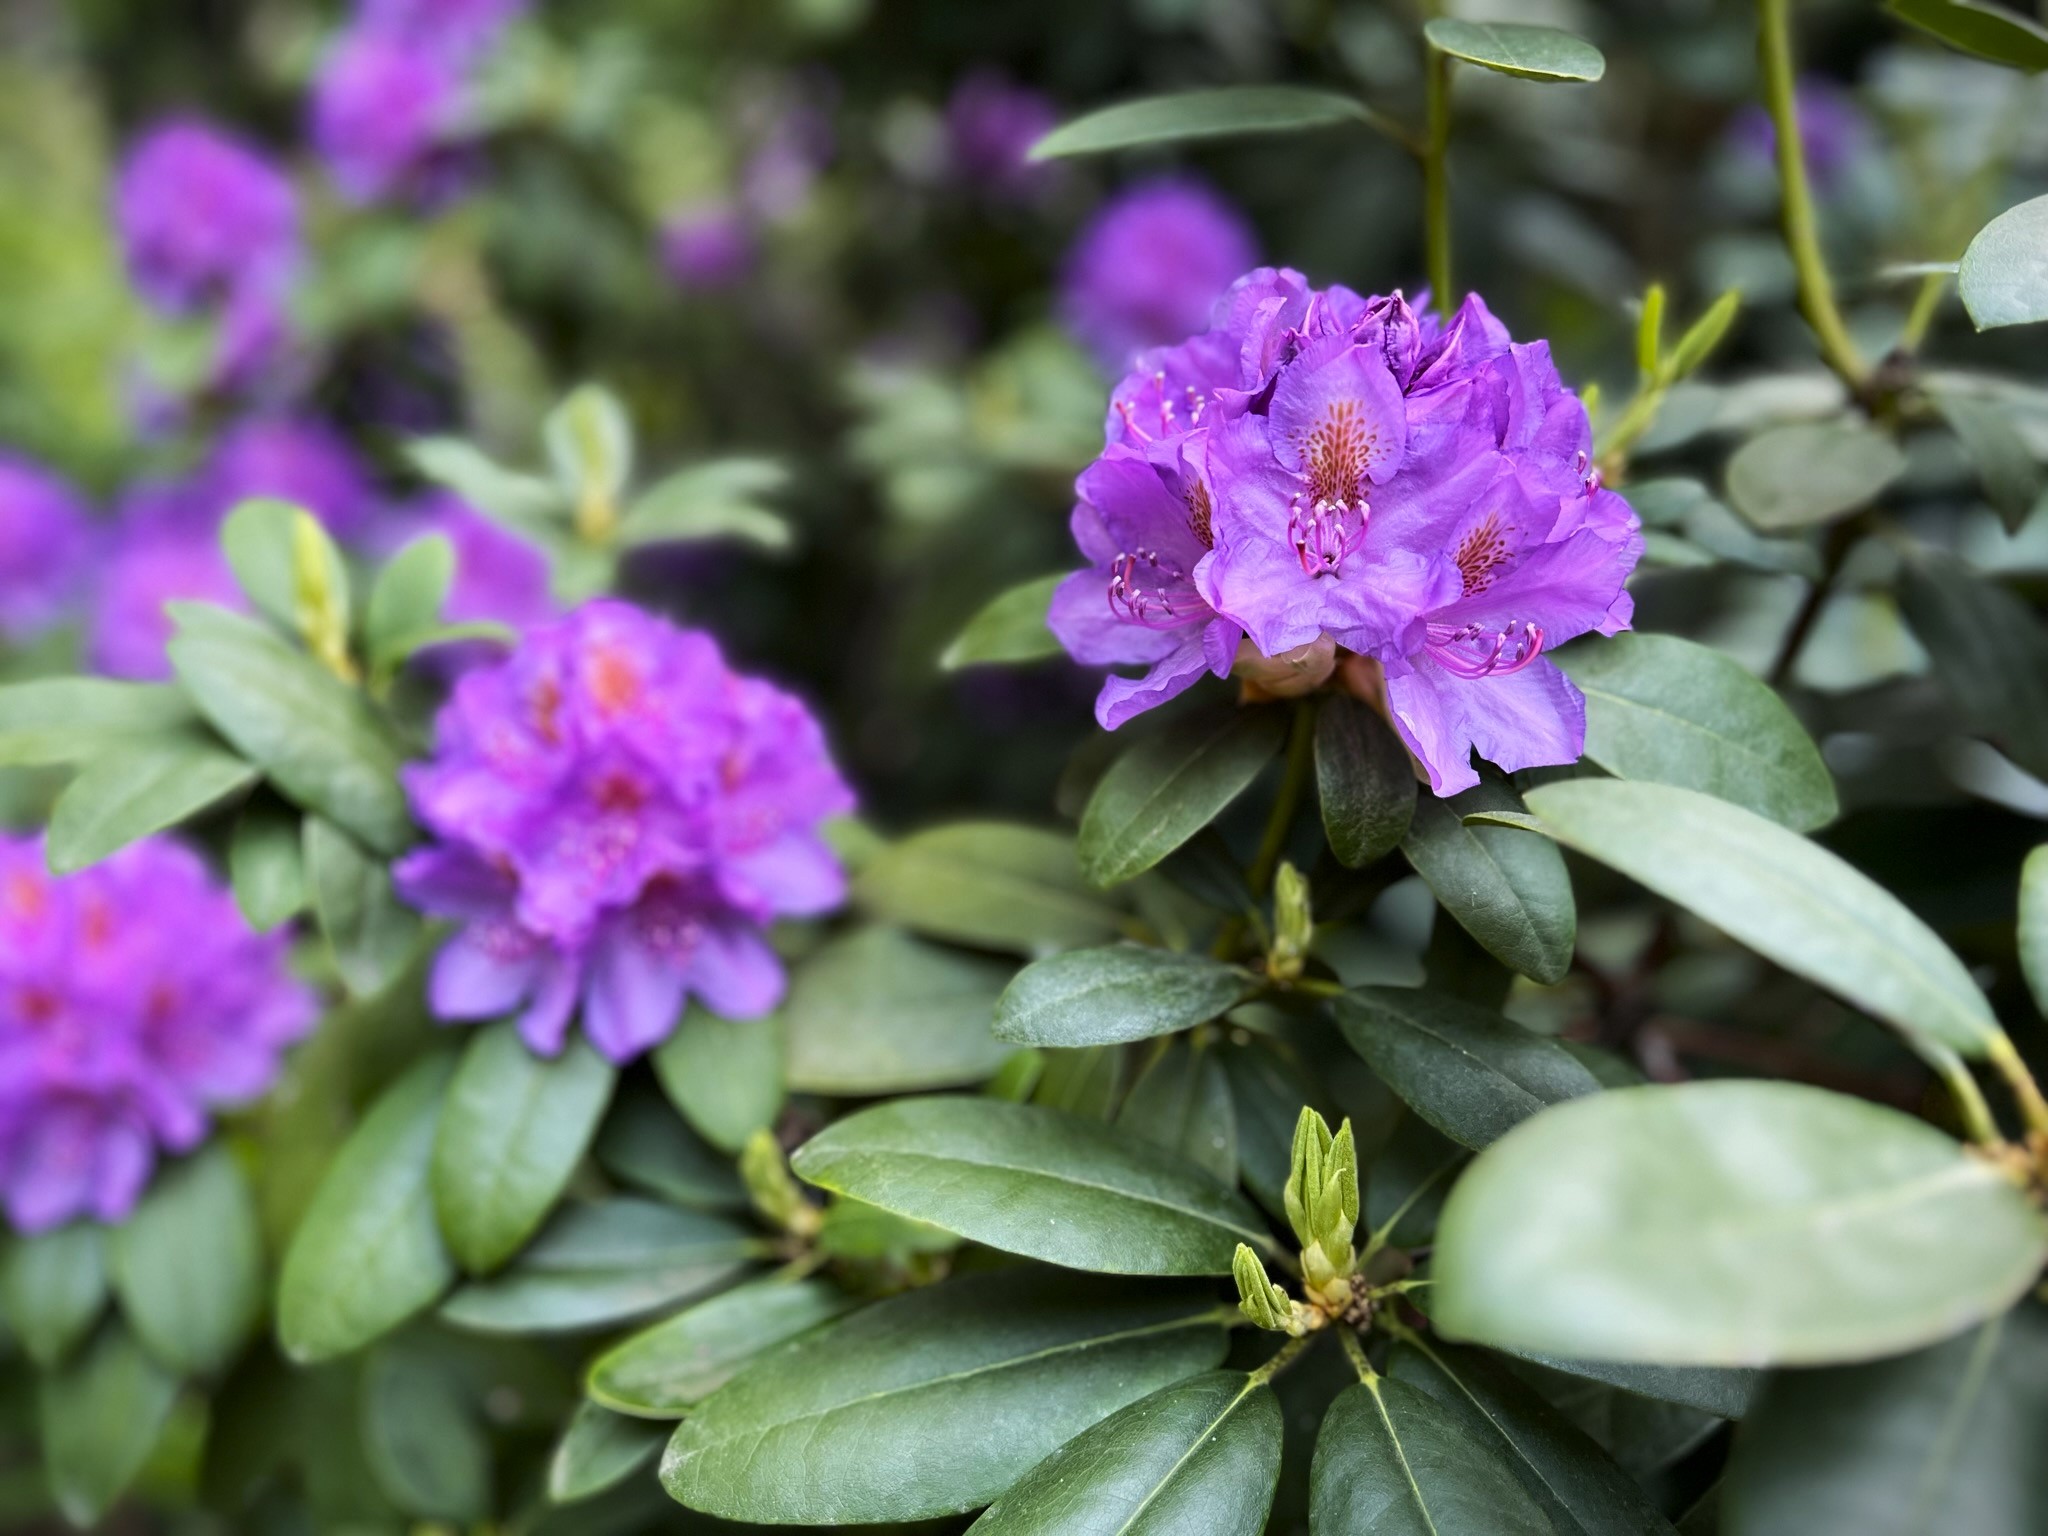 Rhododendron Flowers Nature Leaves Petals Plants 2048x1536